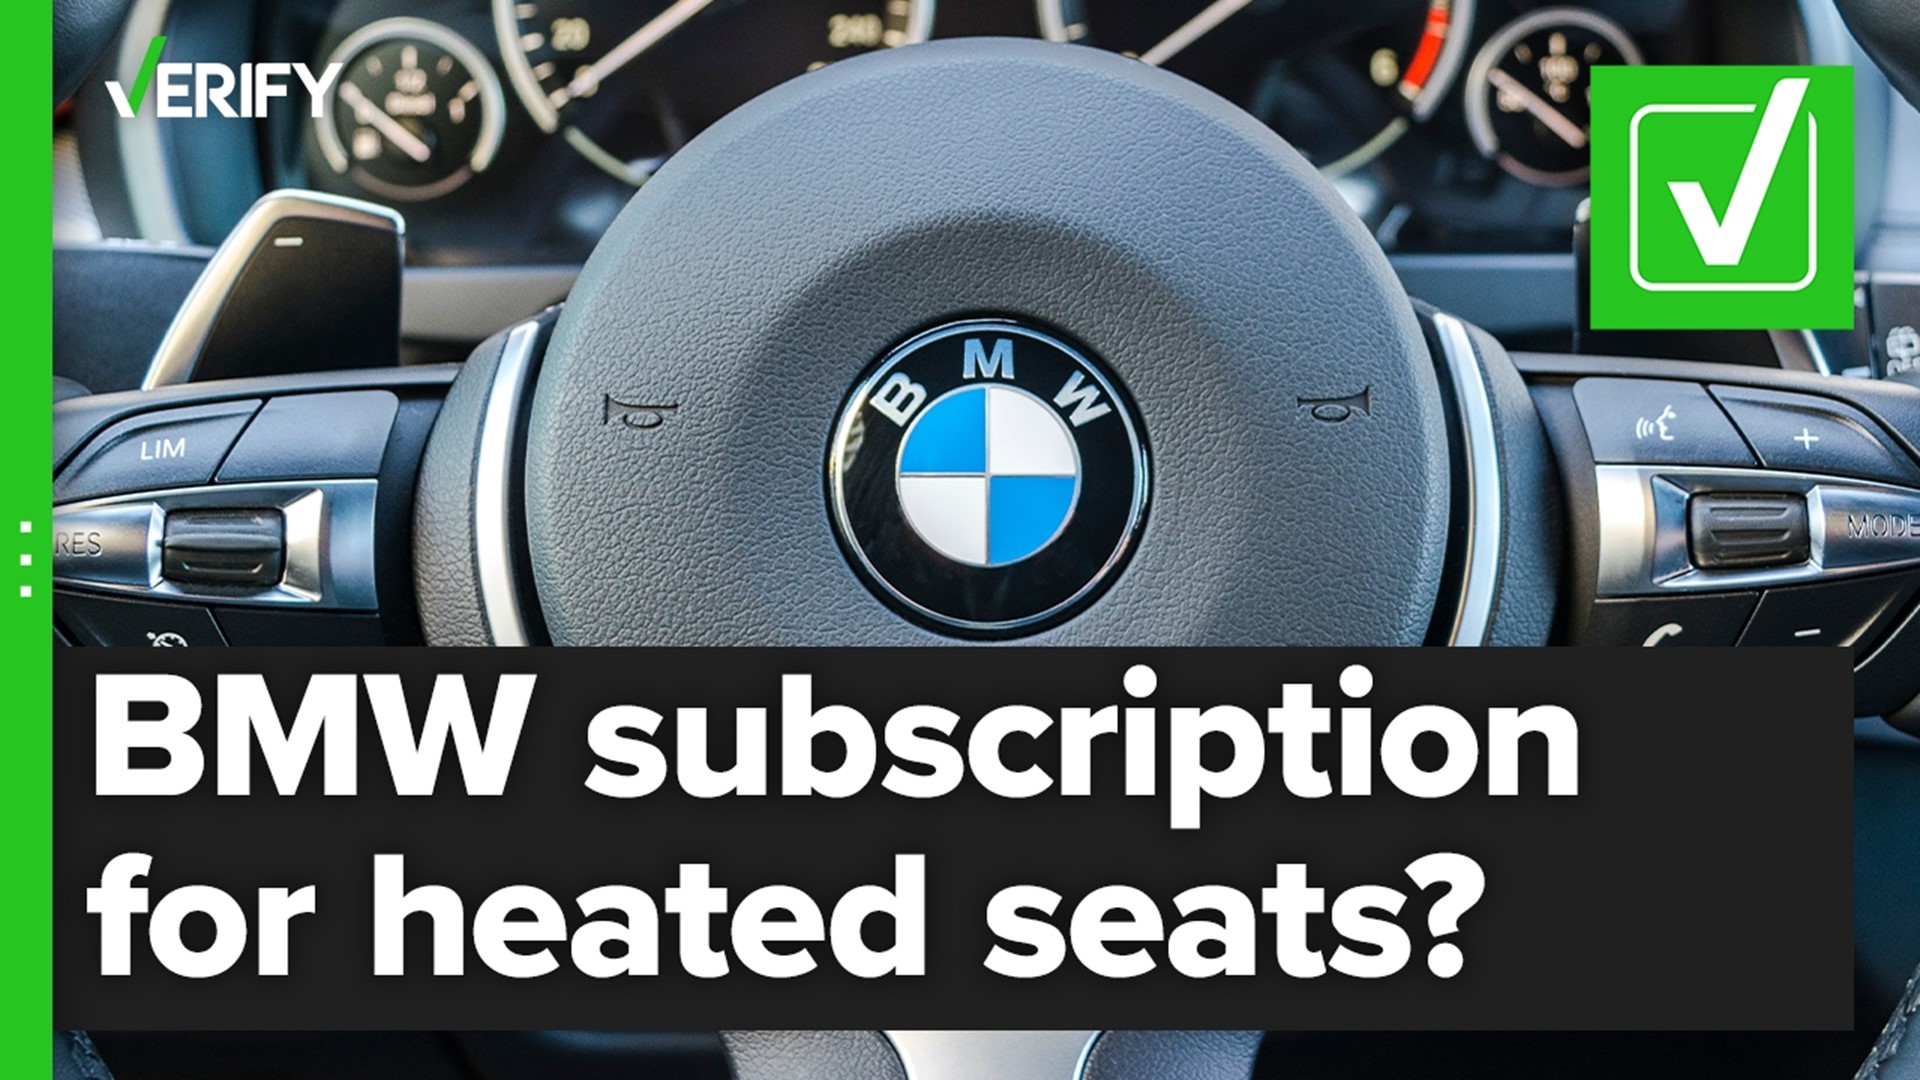 Is BMW selling a monthly subscription service for heated seats? The VERIFY team confirms this is true.